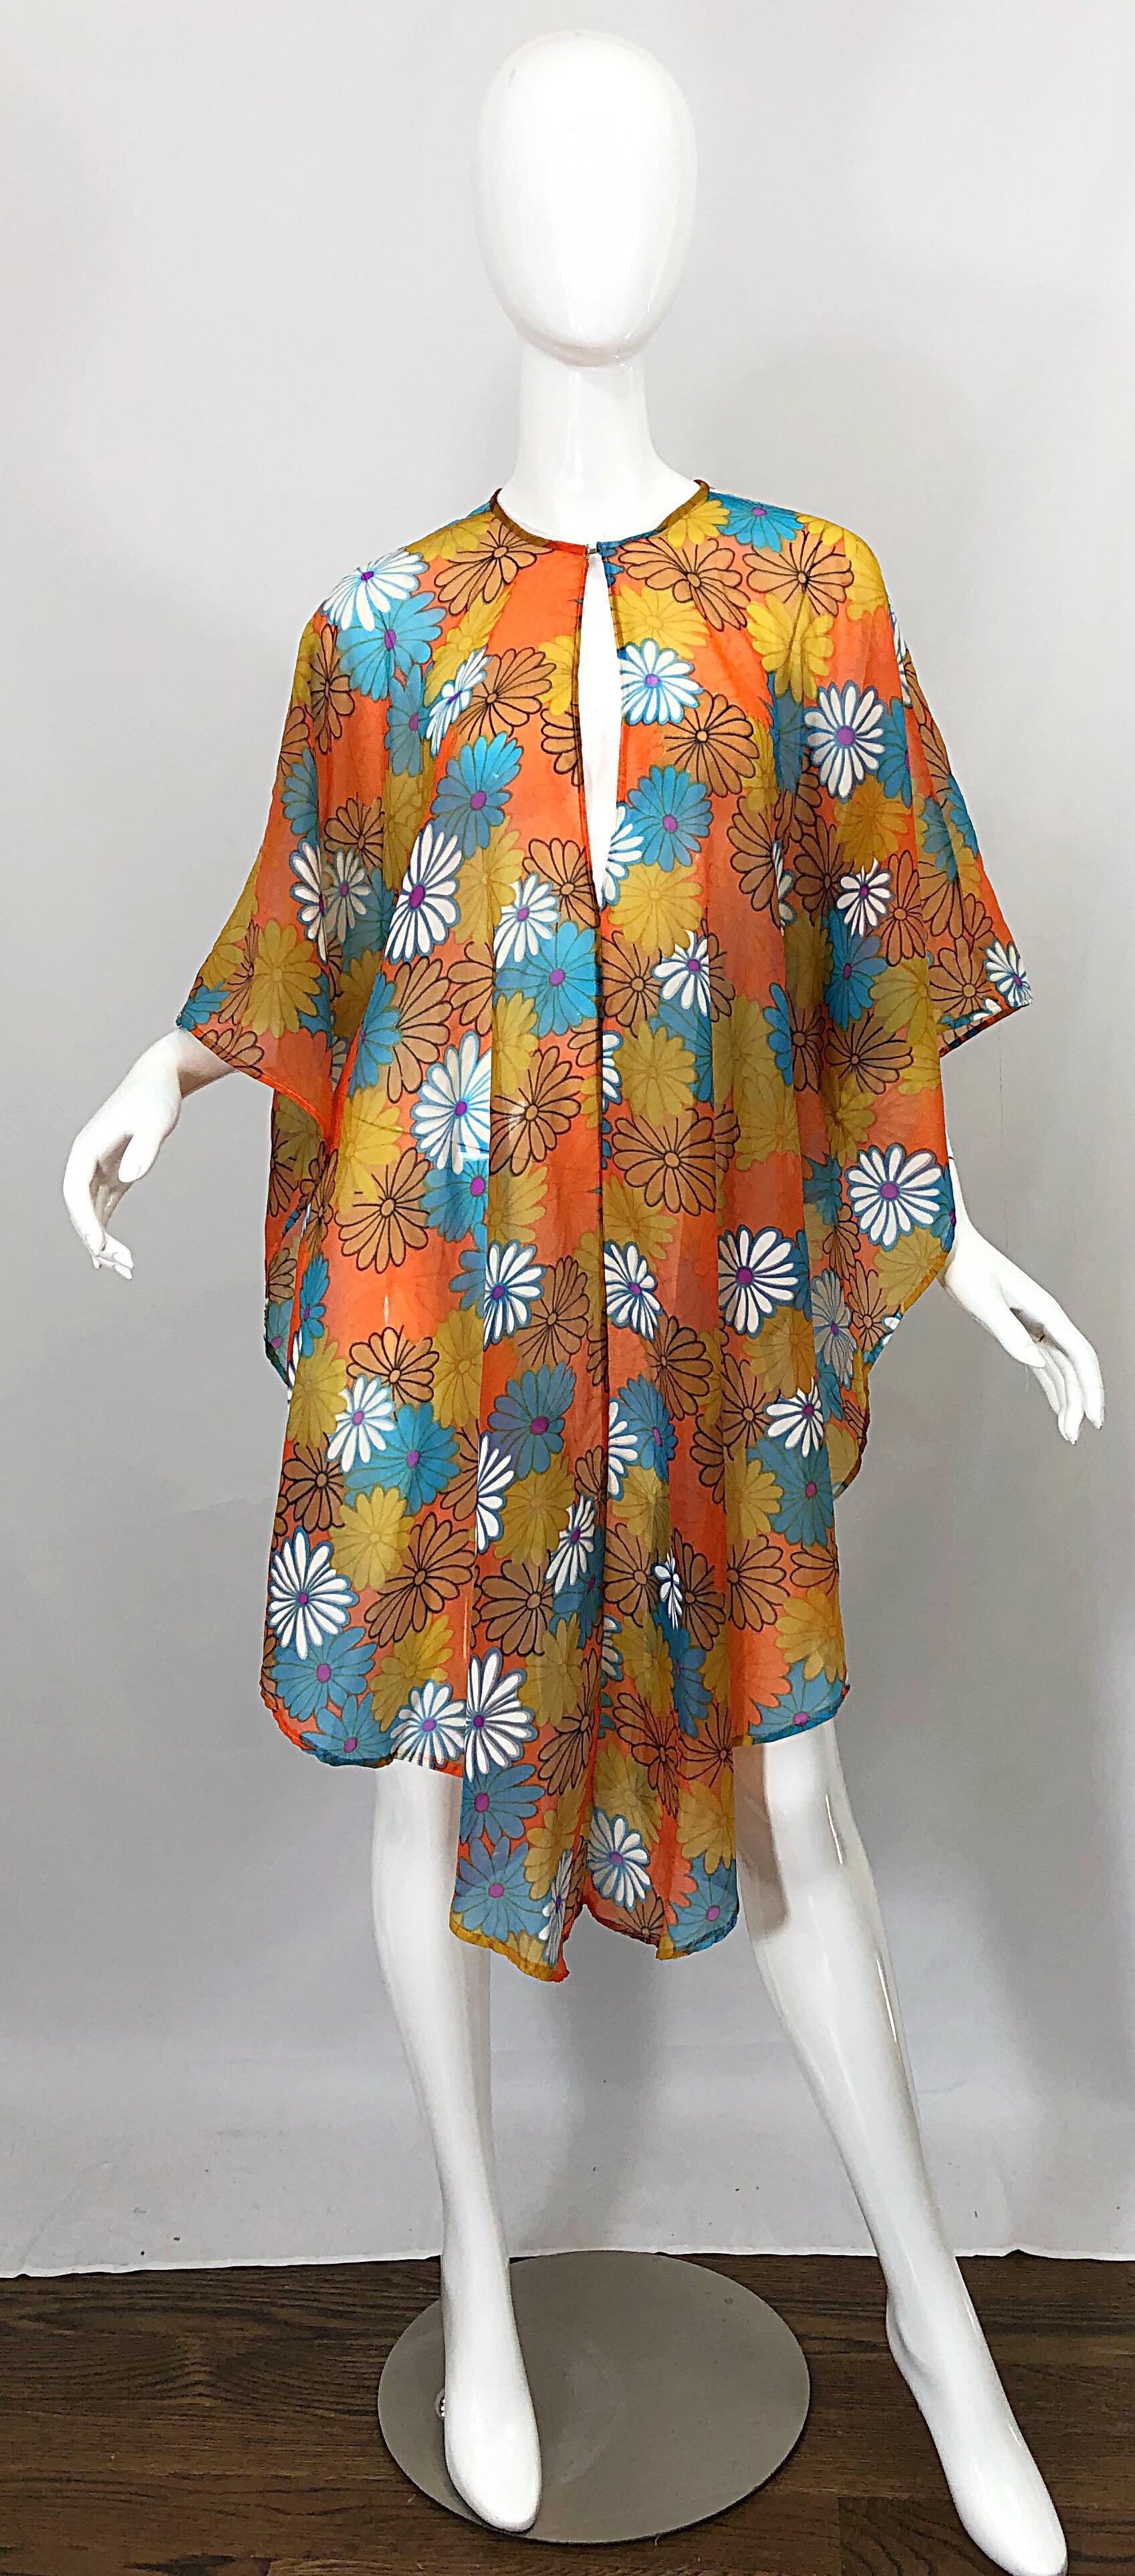 Incredible vintage 70s semi sheer chiffon flower print poncho top! Features vibrant colors in various shades of orange, blue, purple and white. Soft nylon chiffon is both soft and durable. Keyhole at neck can be worn either forward or on the back.